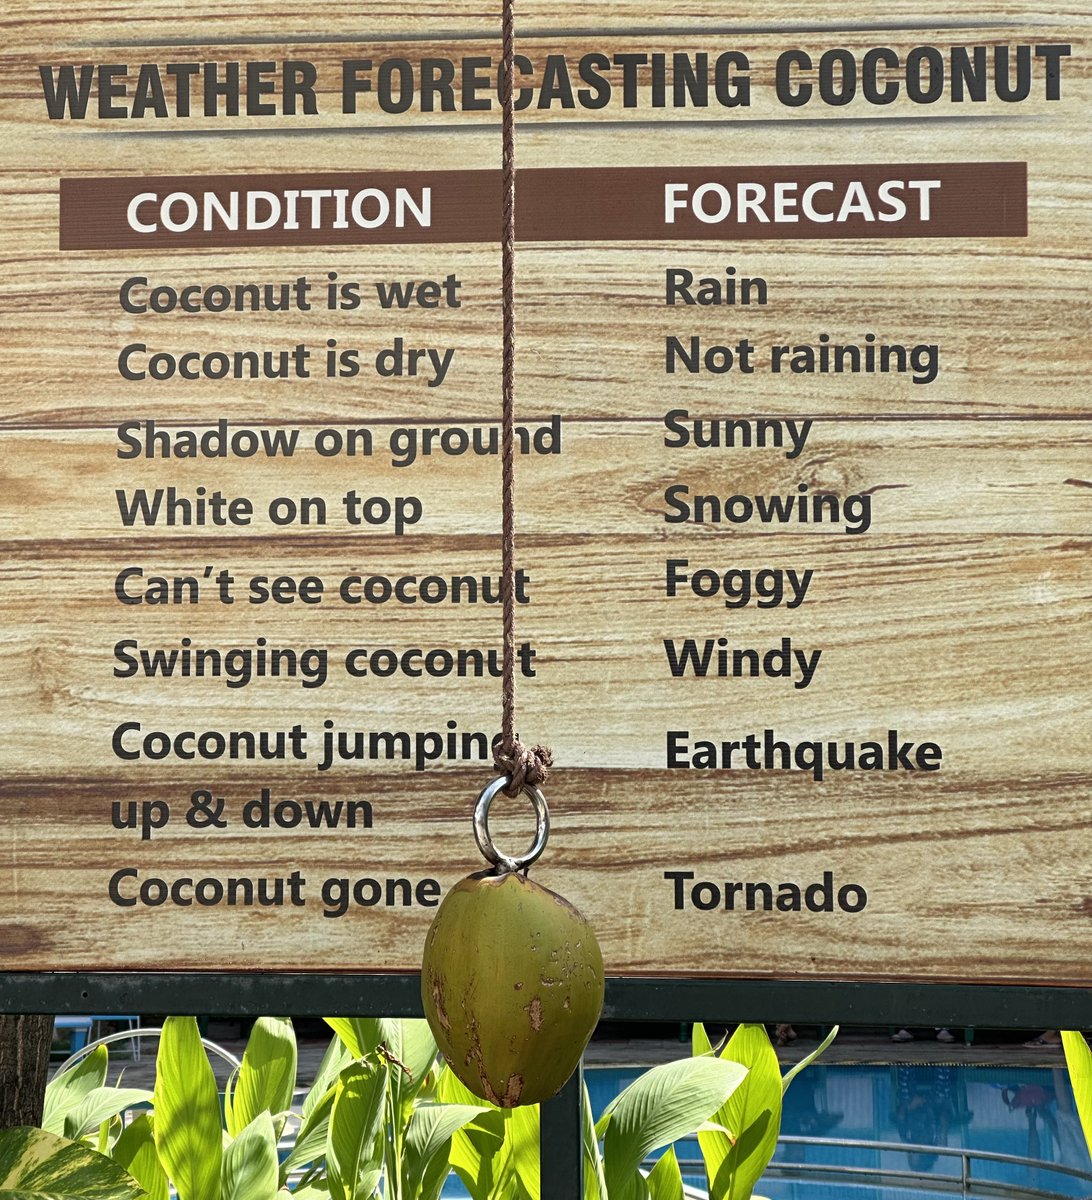 Weather Forecasting Coconut. Learnt this in #Madurai .